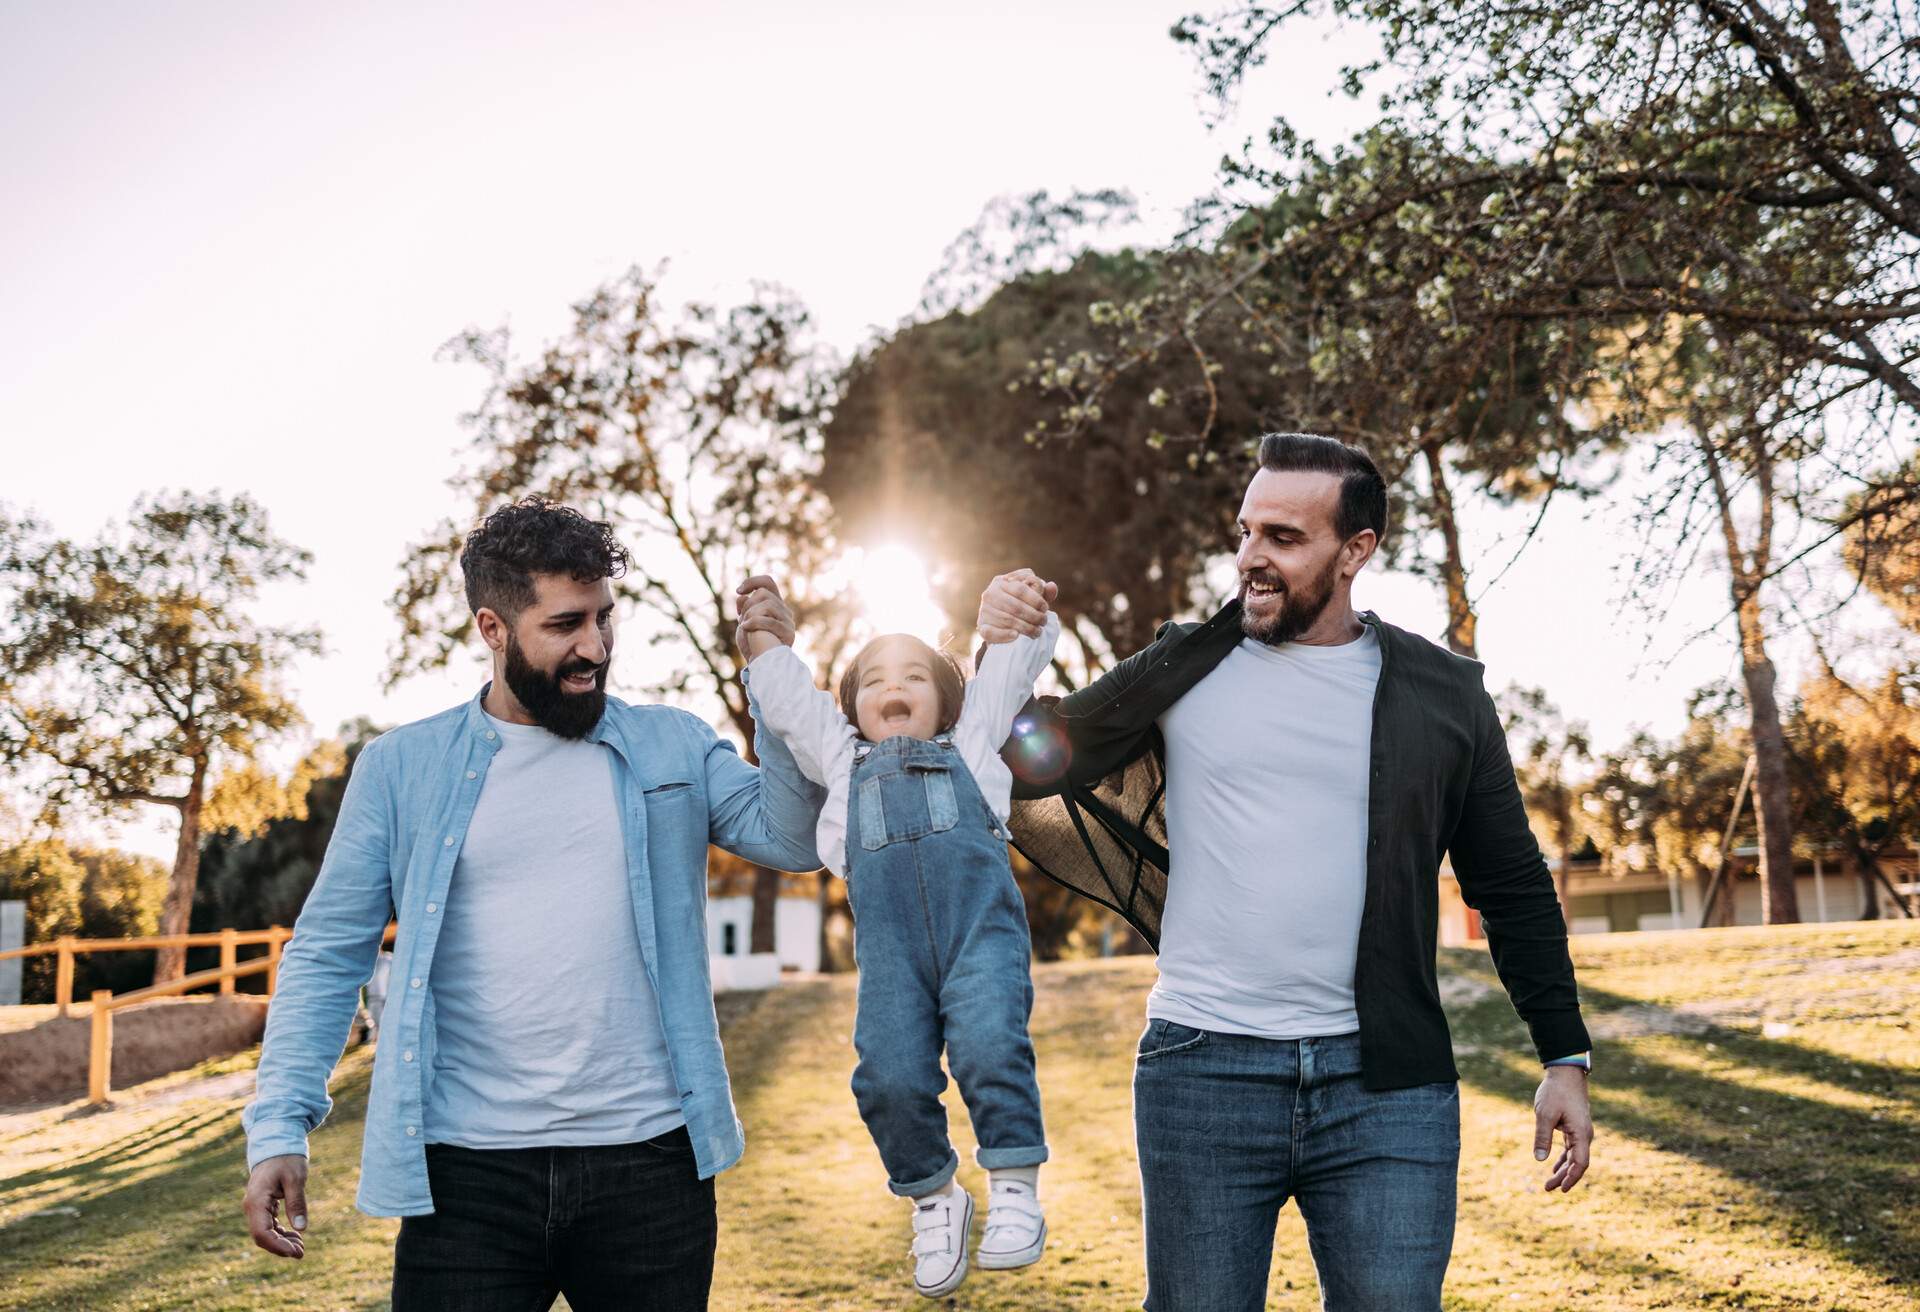 Male gay couple lift up their little girl who is laughing happily. Diverse modern family concept.